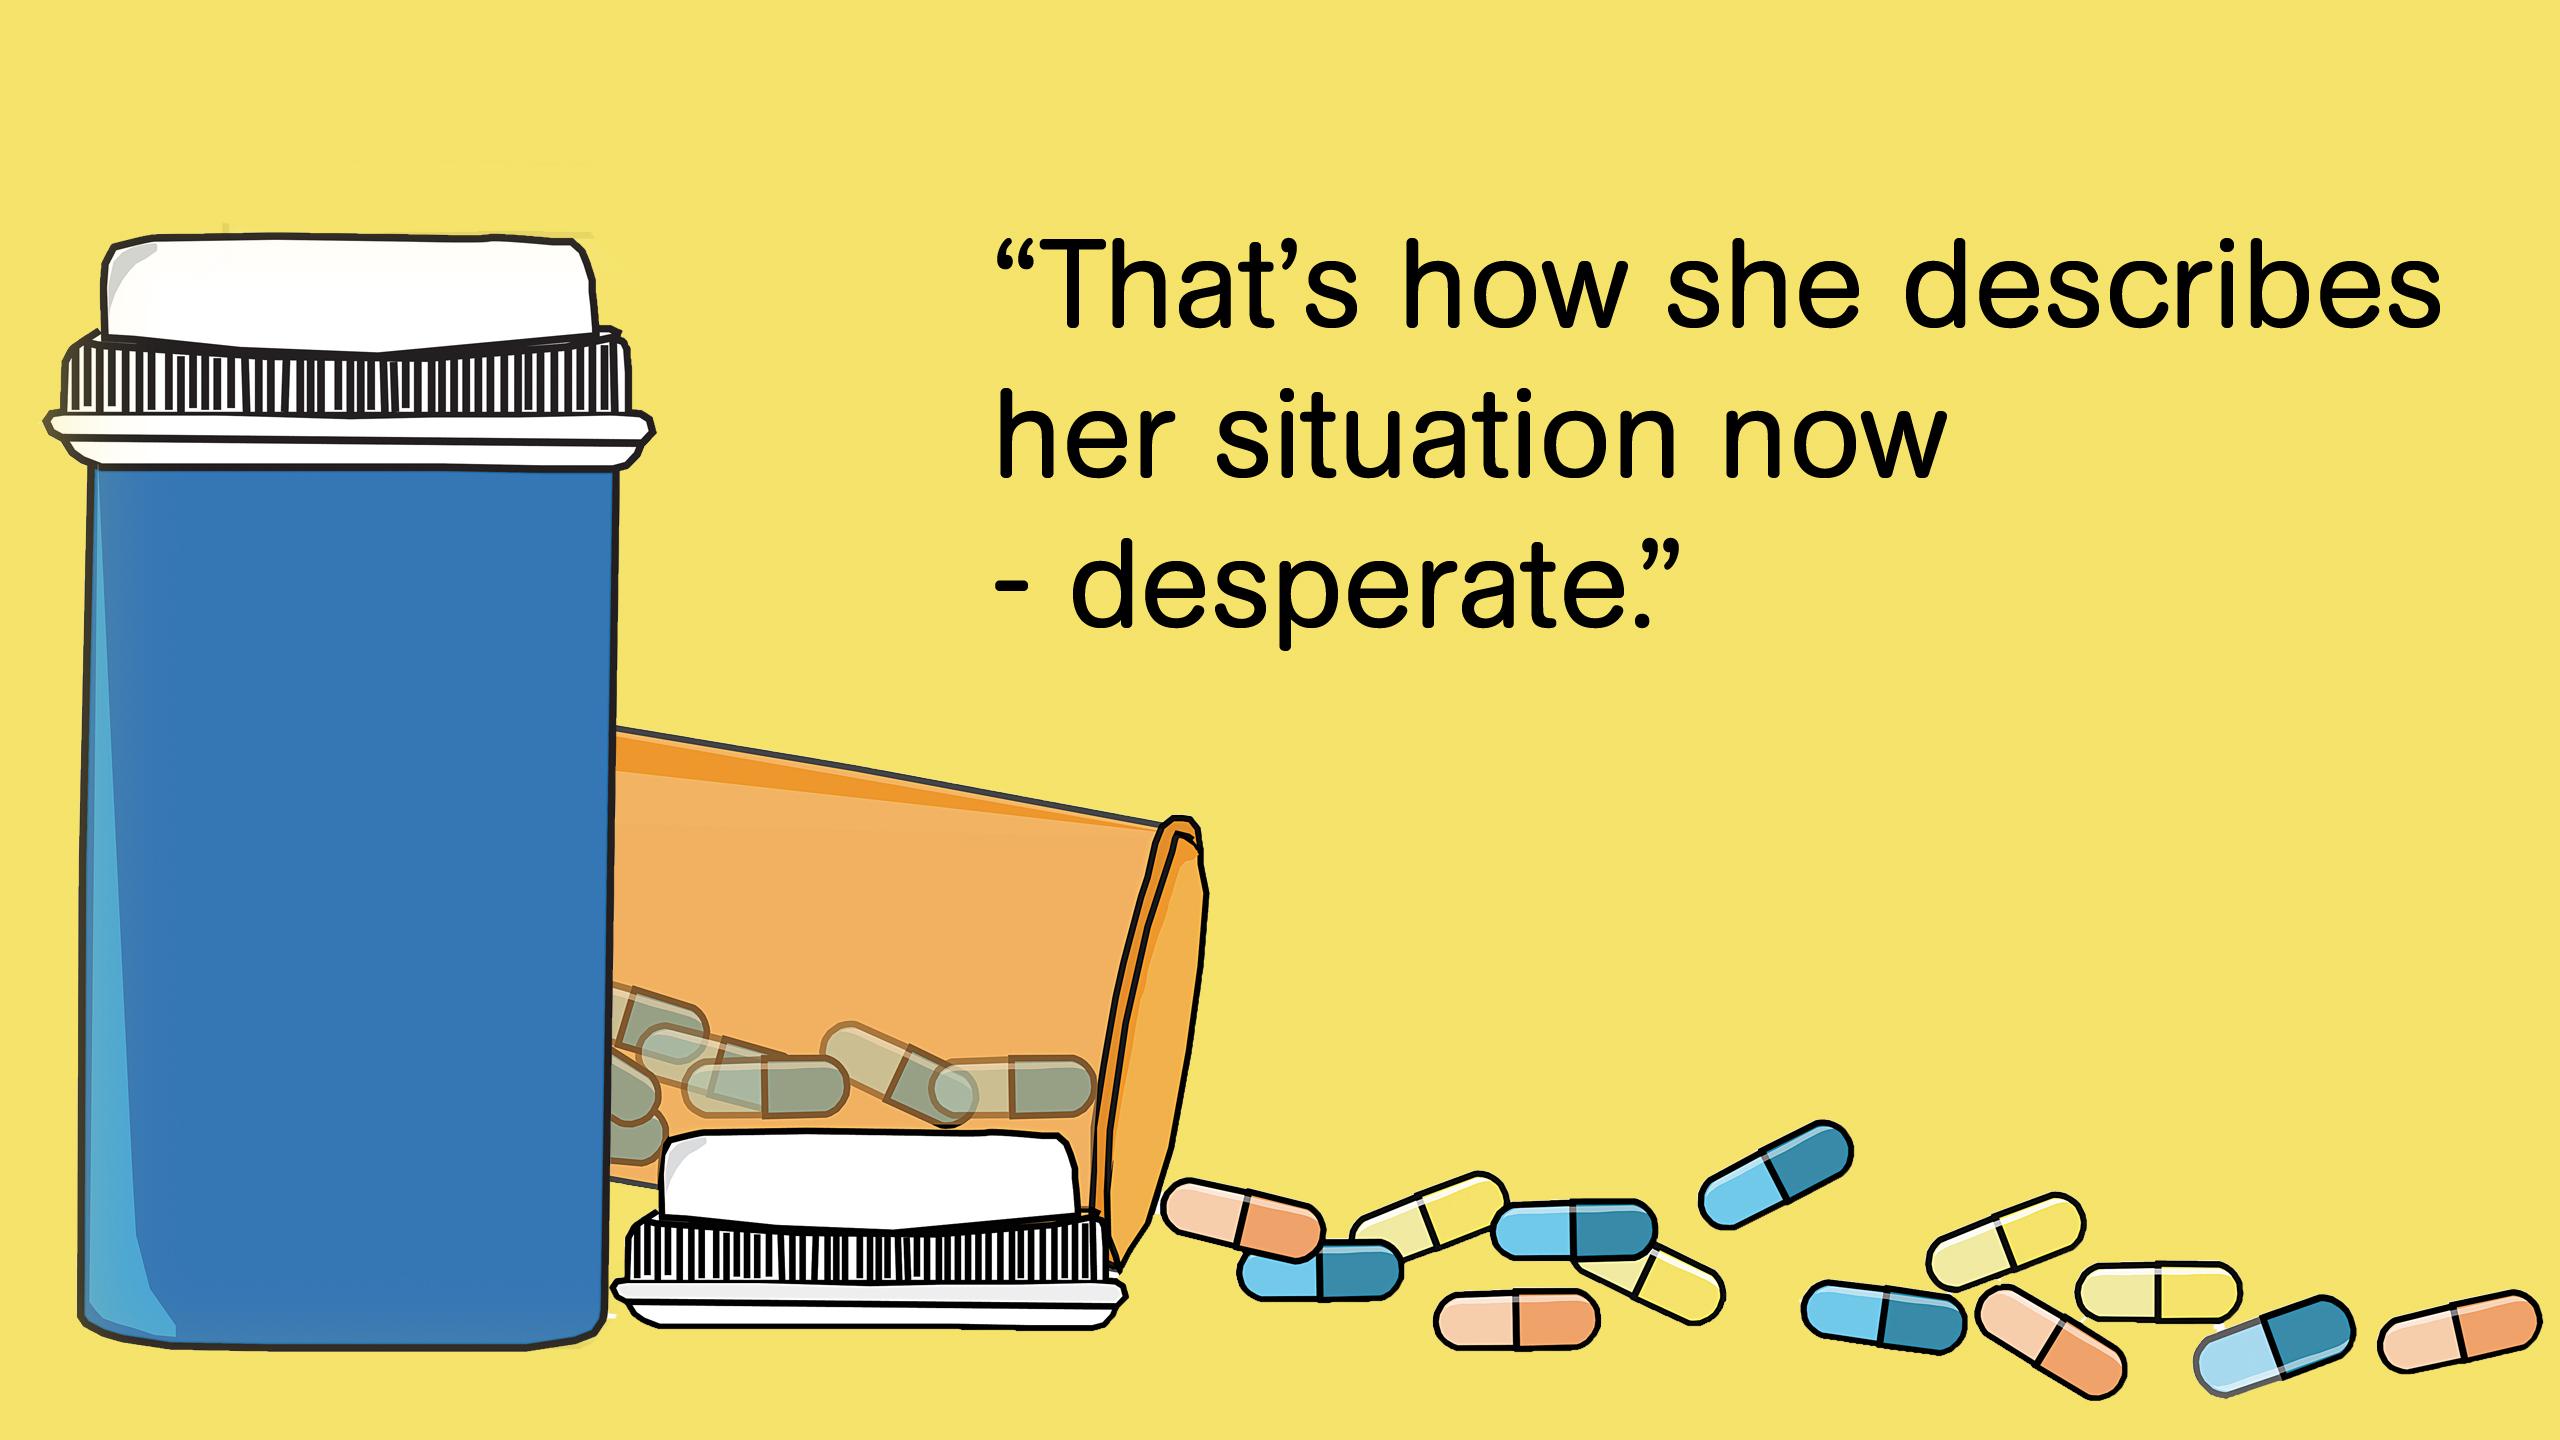 Post-secondary institutions in Ontario have high rates of stimulant drug misuse when compared to the rest of the country. ILLUSTRATION BY PREMILA D'SA